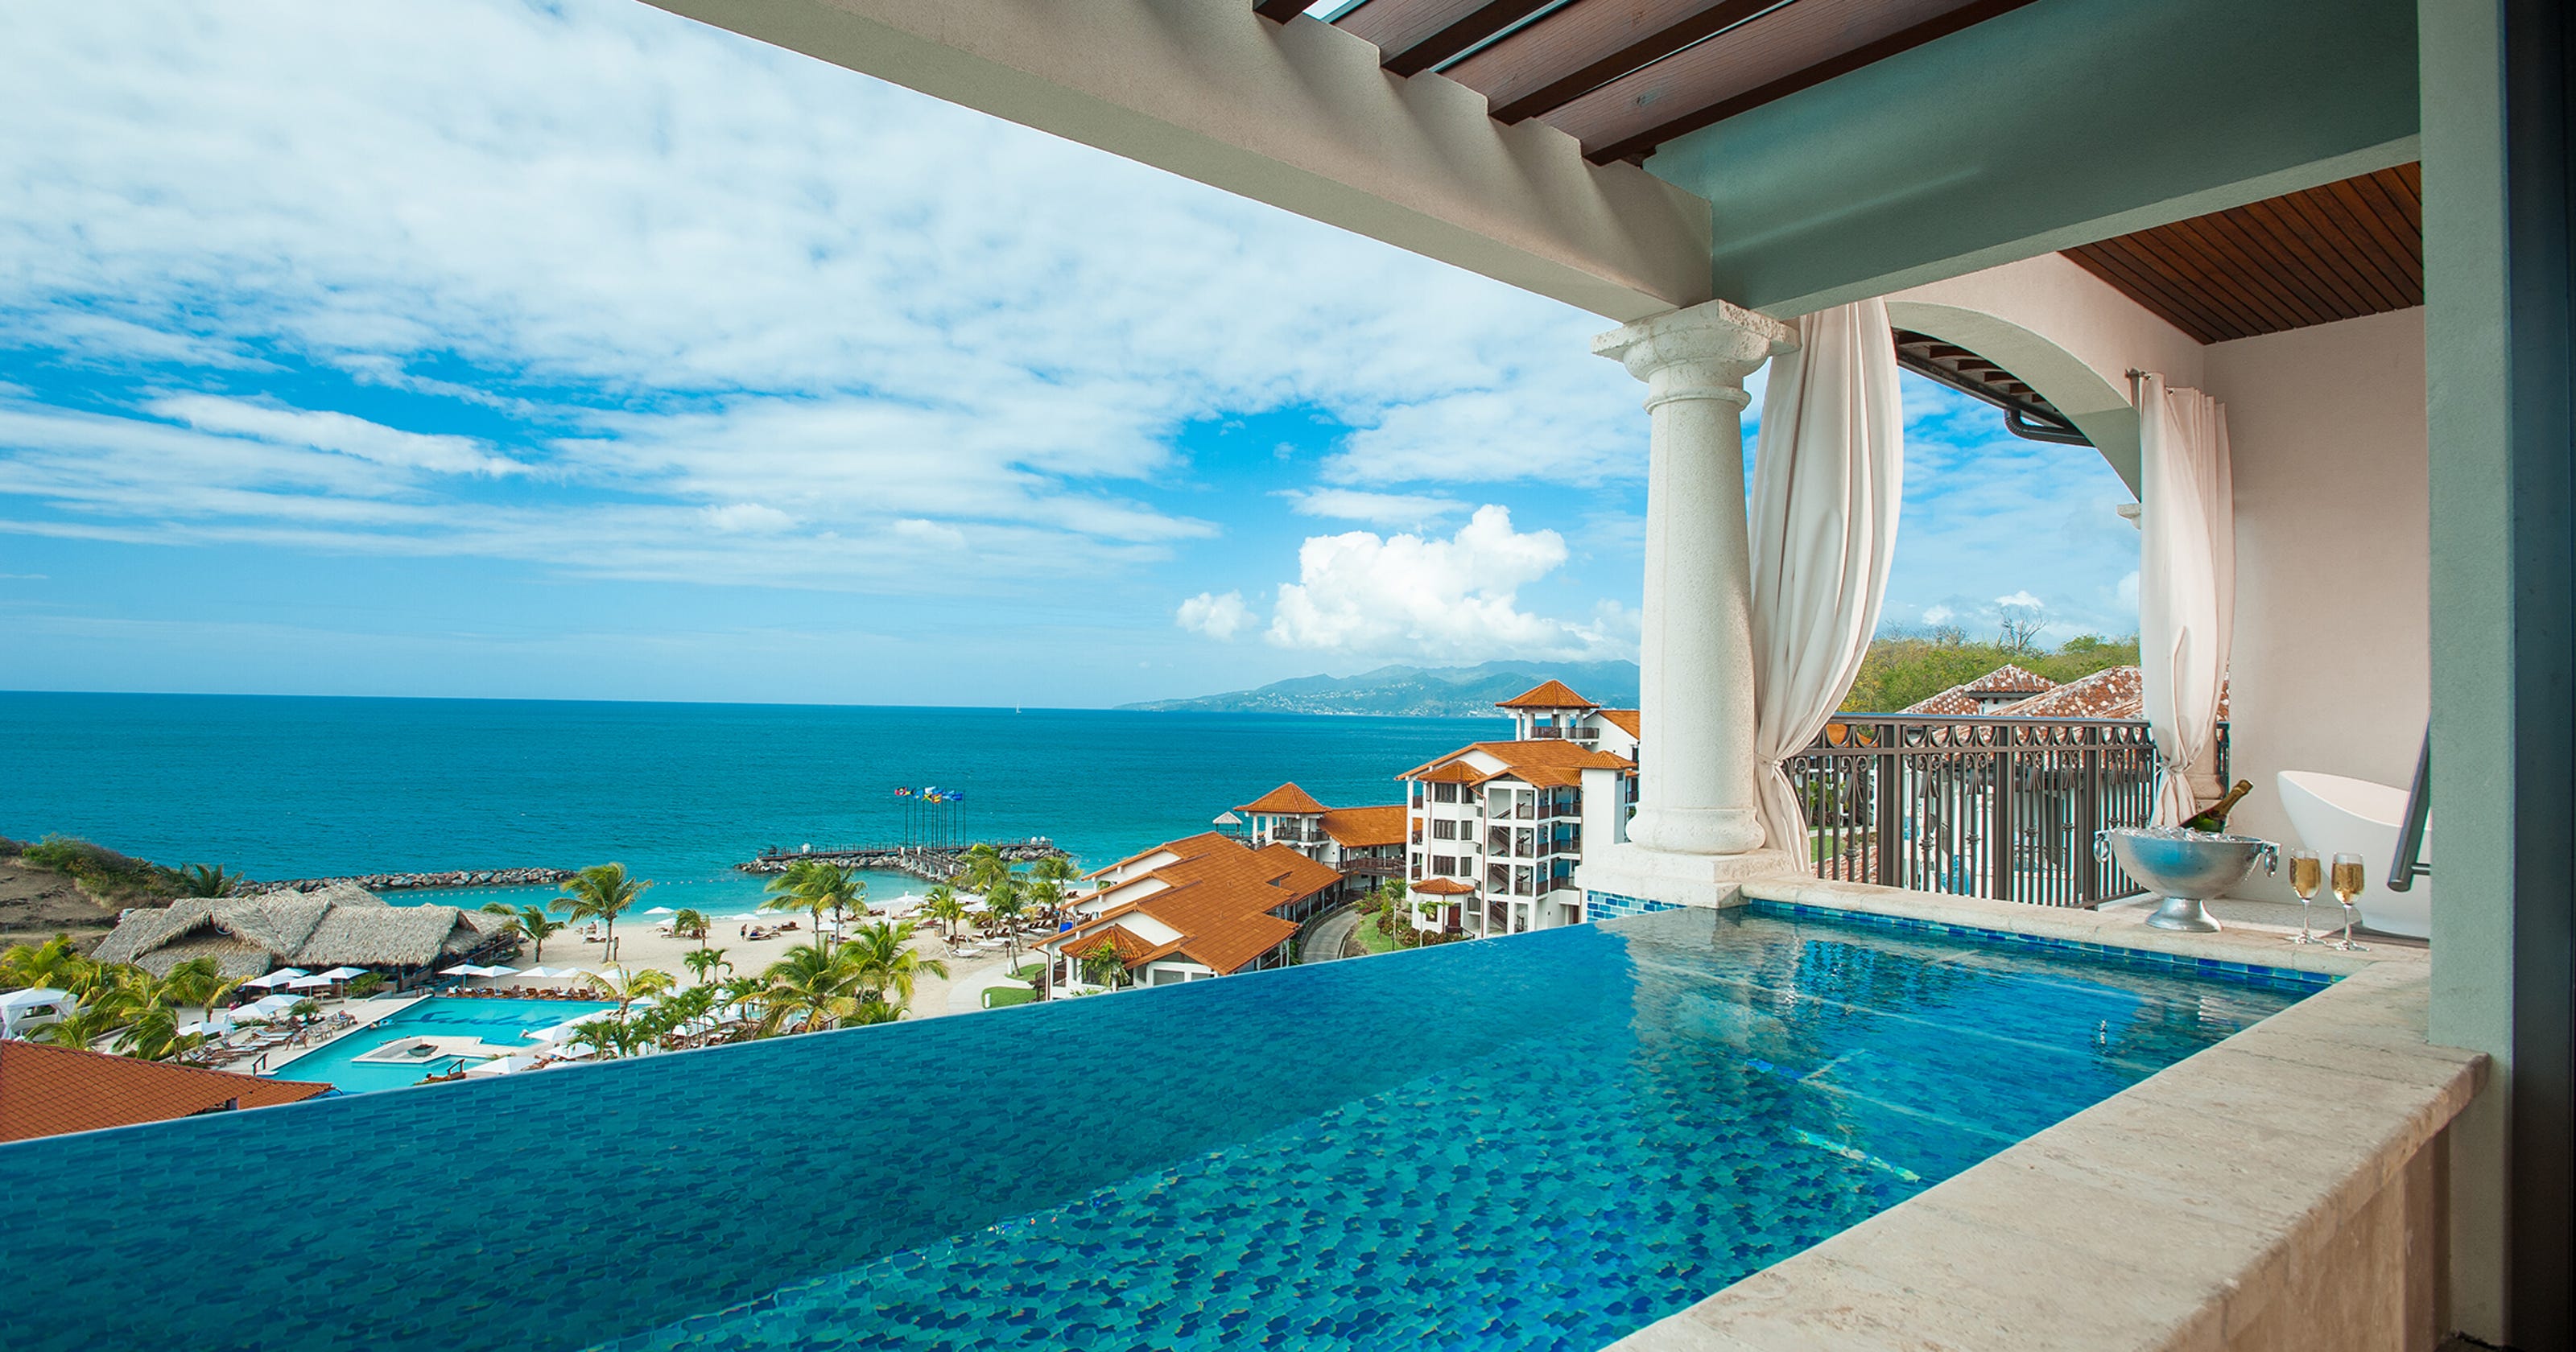 In Your Dreams Ultra Luxurious Caribbean Honeymoons